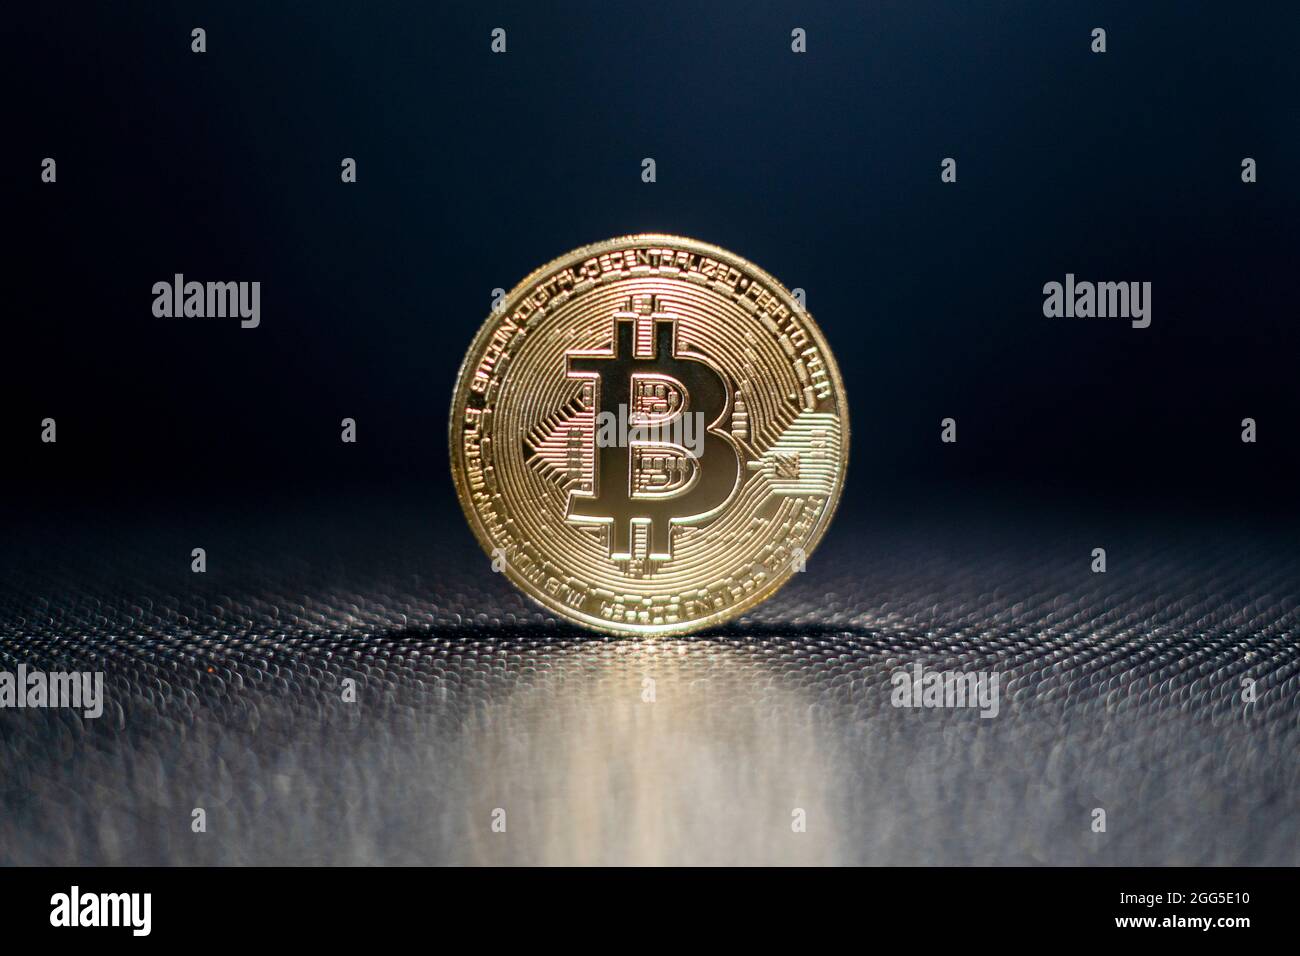 Bitcoin crypto currency holding. Gold coin with BTC symbol. Blockchain technology. Bitcoin Increase in price or crash. Investing in virtual assets. Stock Photo